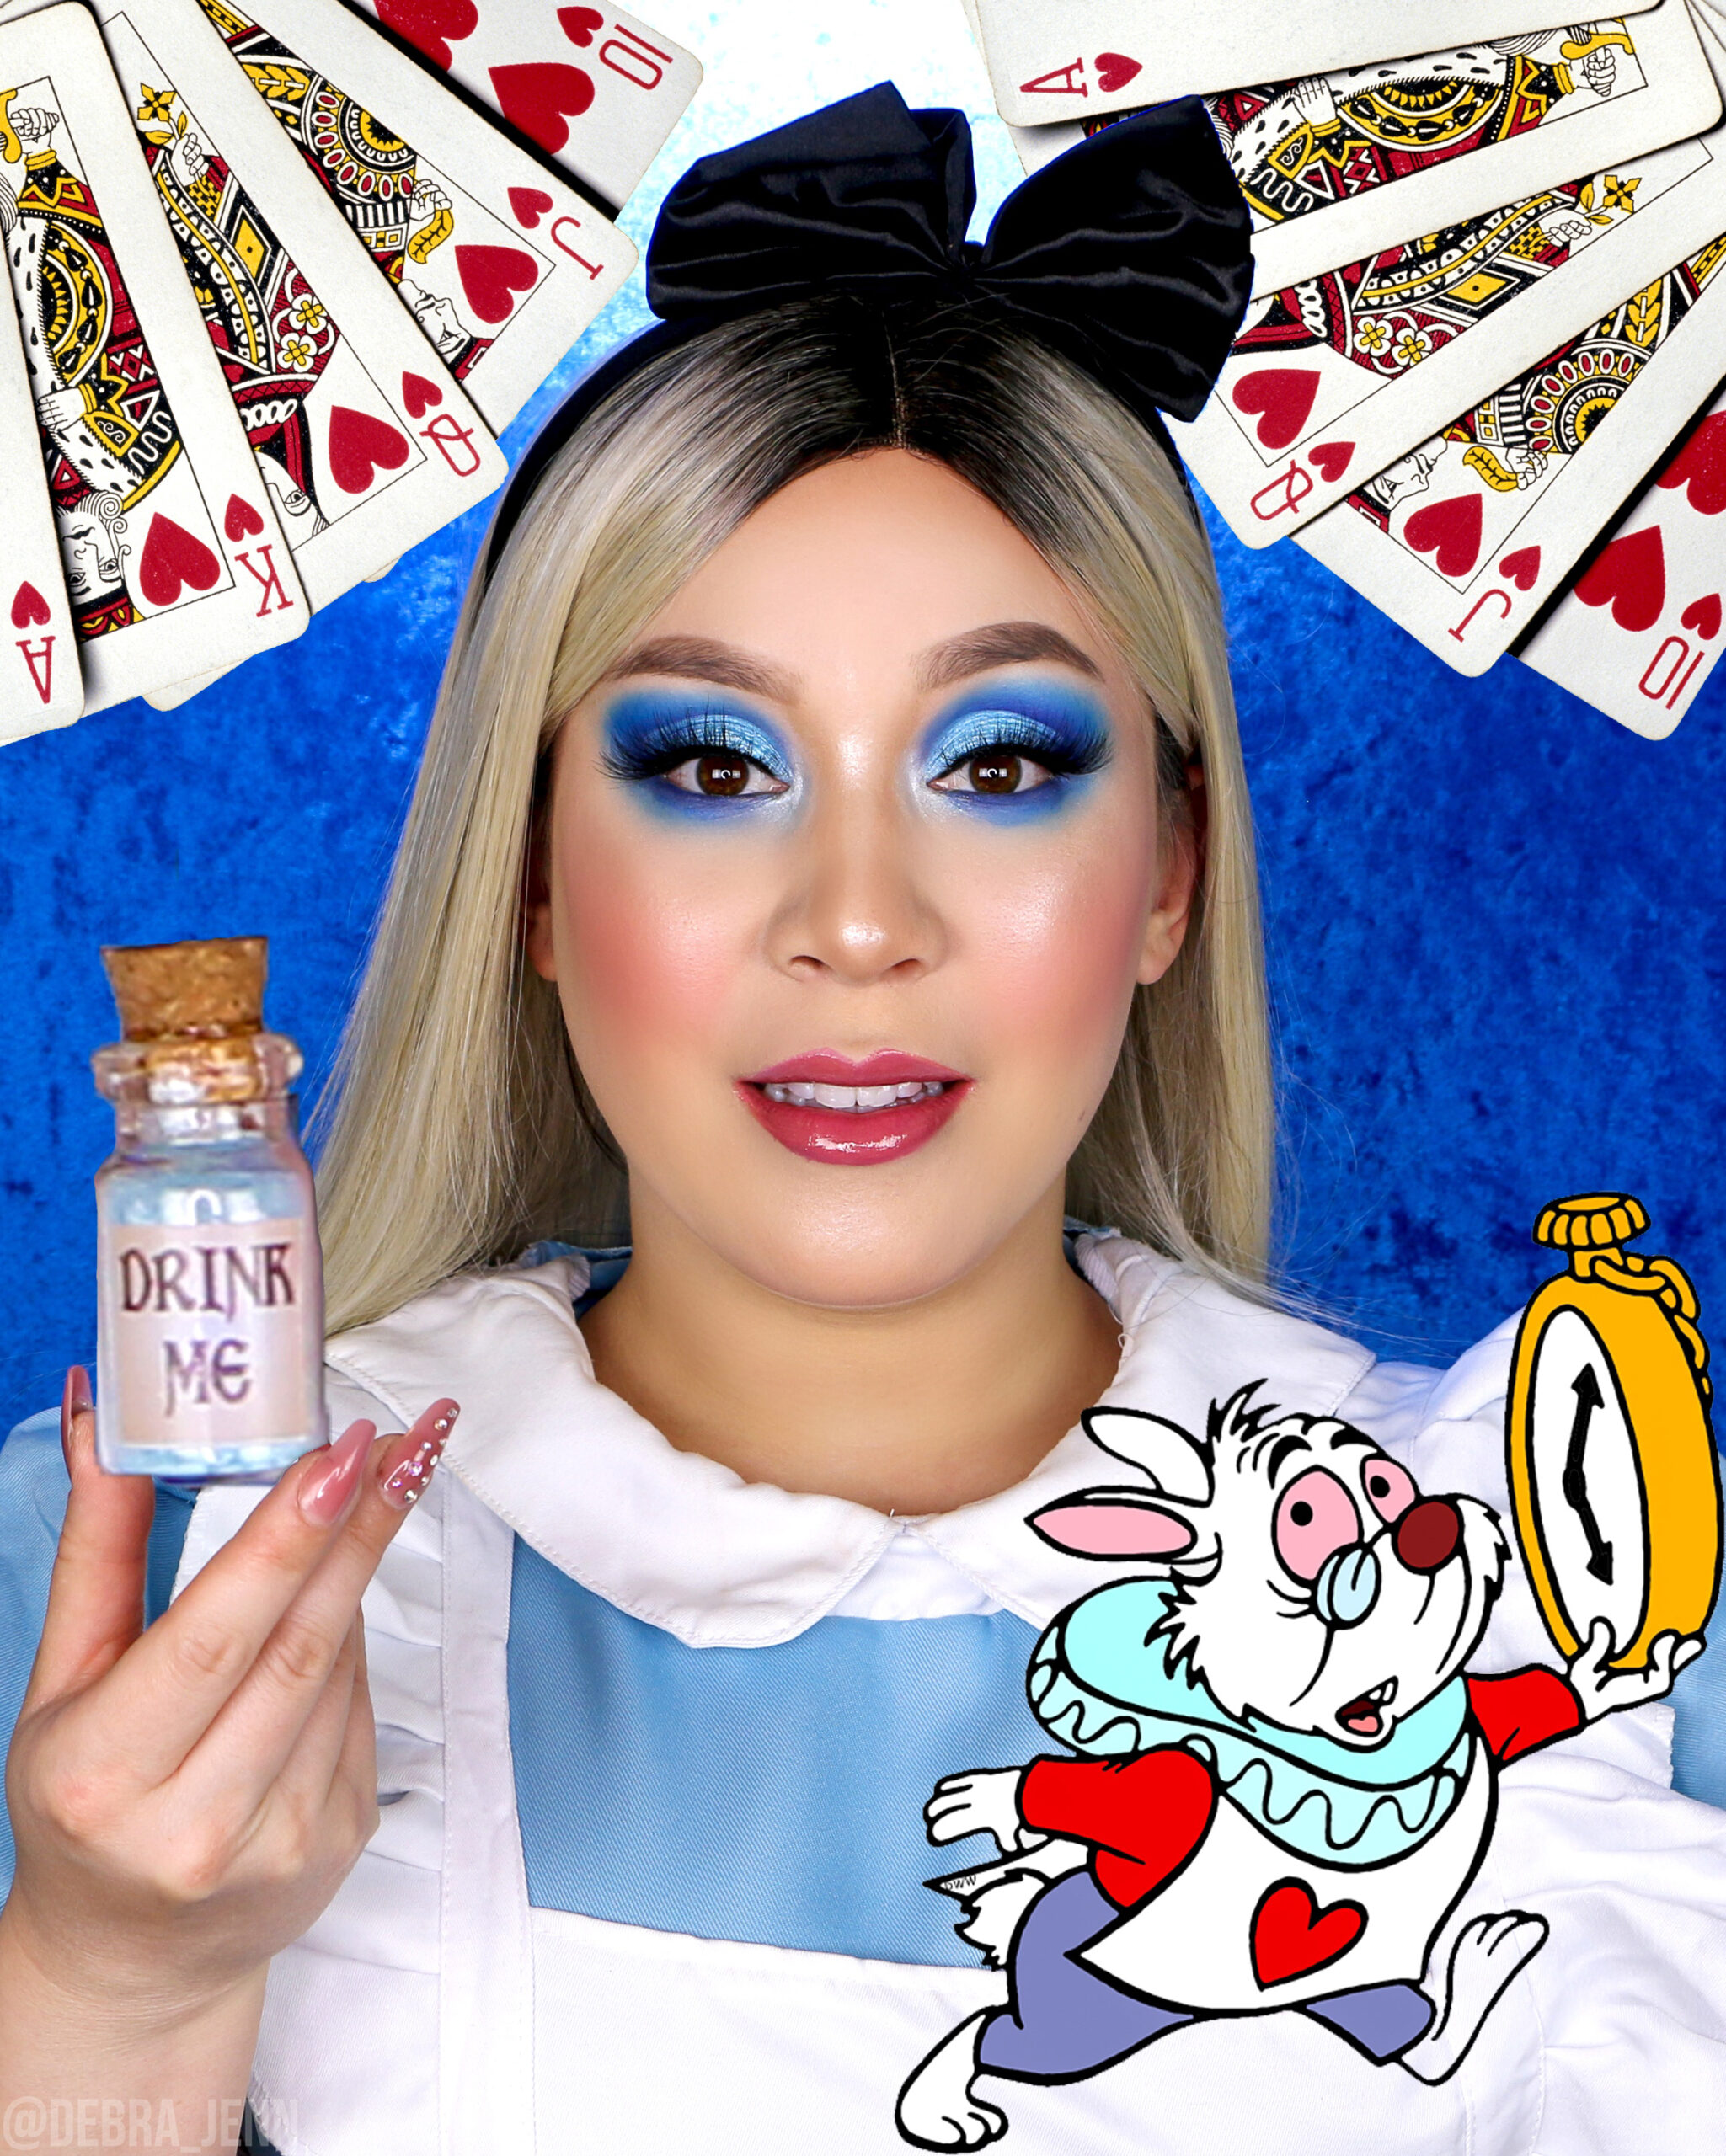 Alice in Wonderland Makeup Looks: 5 Halloween Costumes for a Group